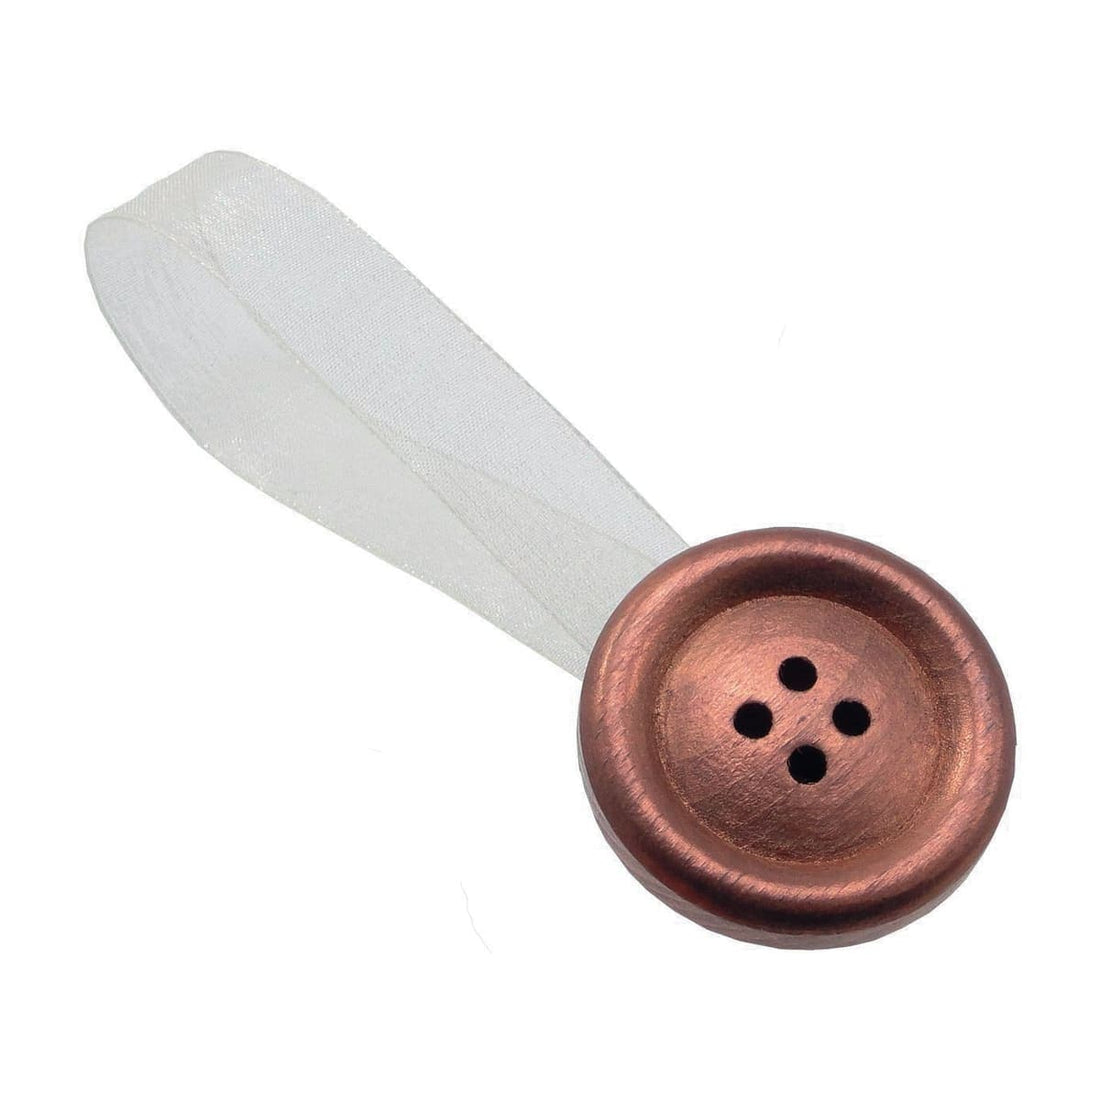 COPPER-PLATED BUTTON MAGNETS D38MM - best price from Maltashopper.com BR480008808